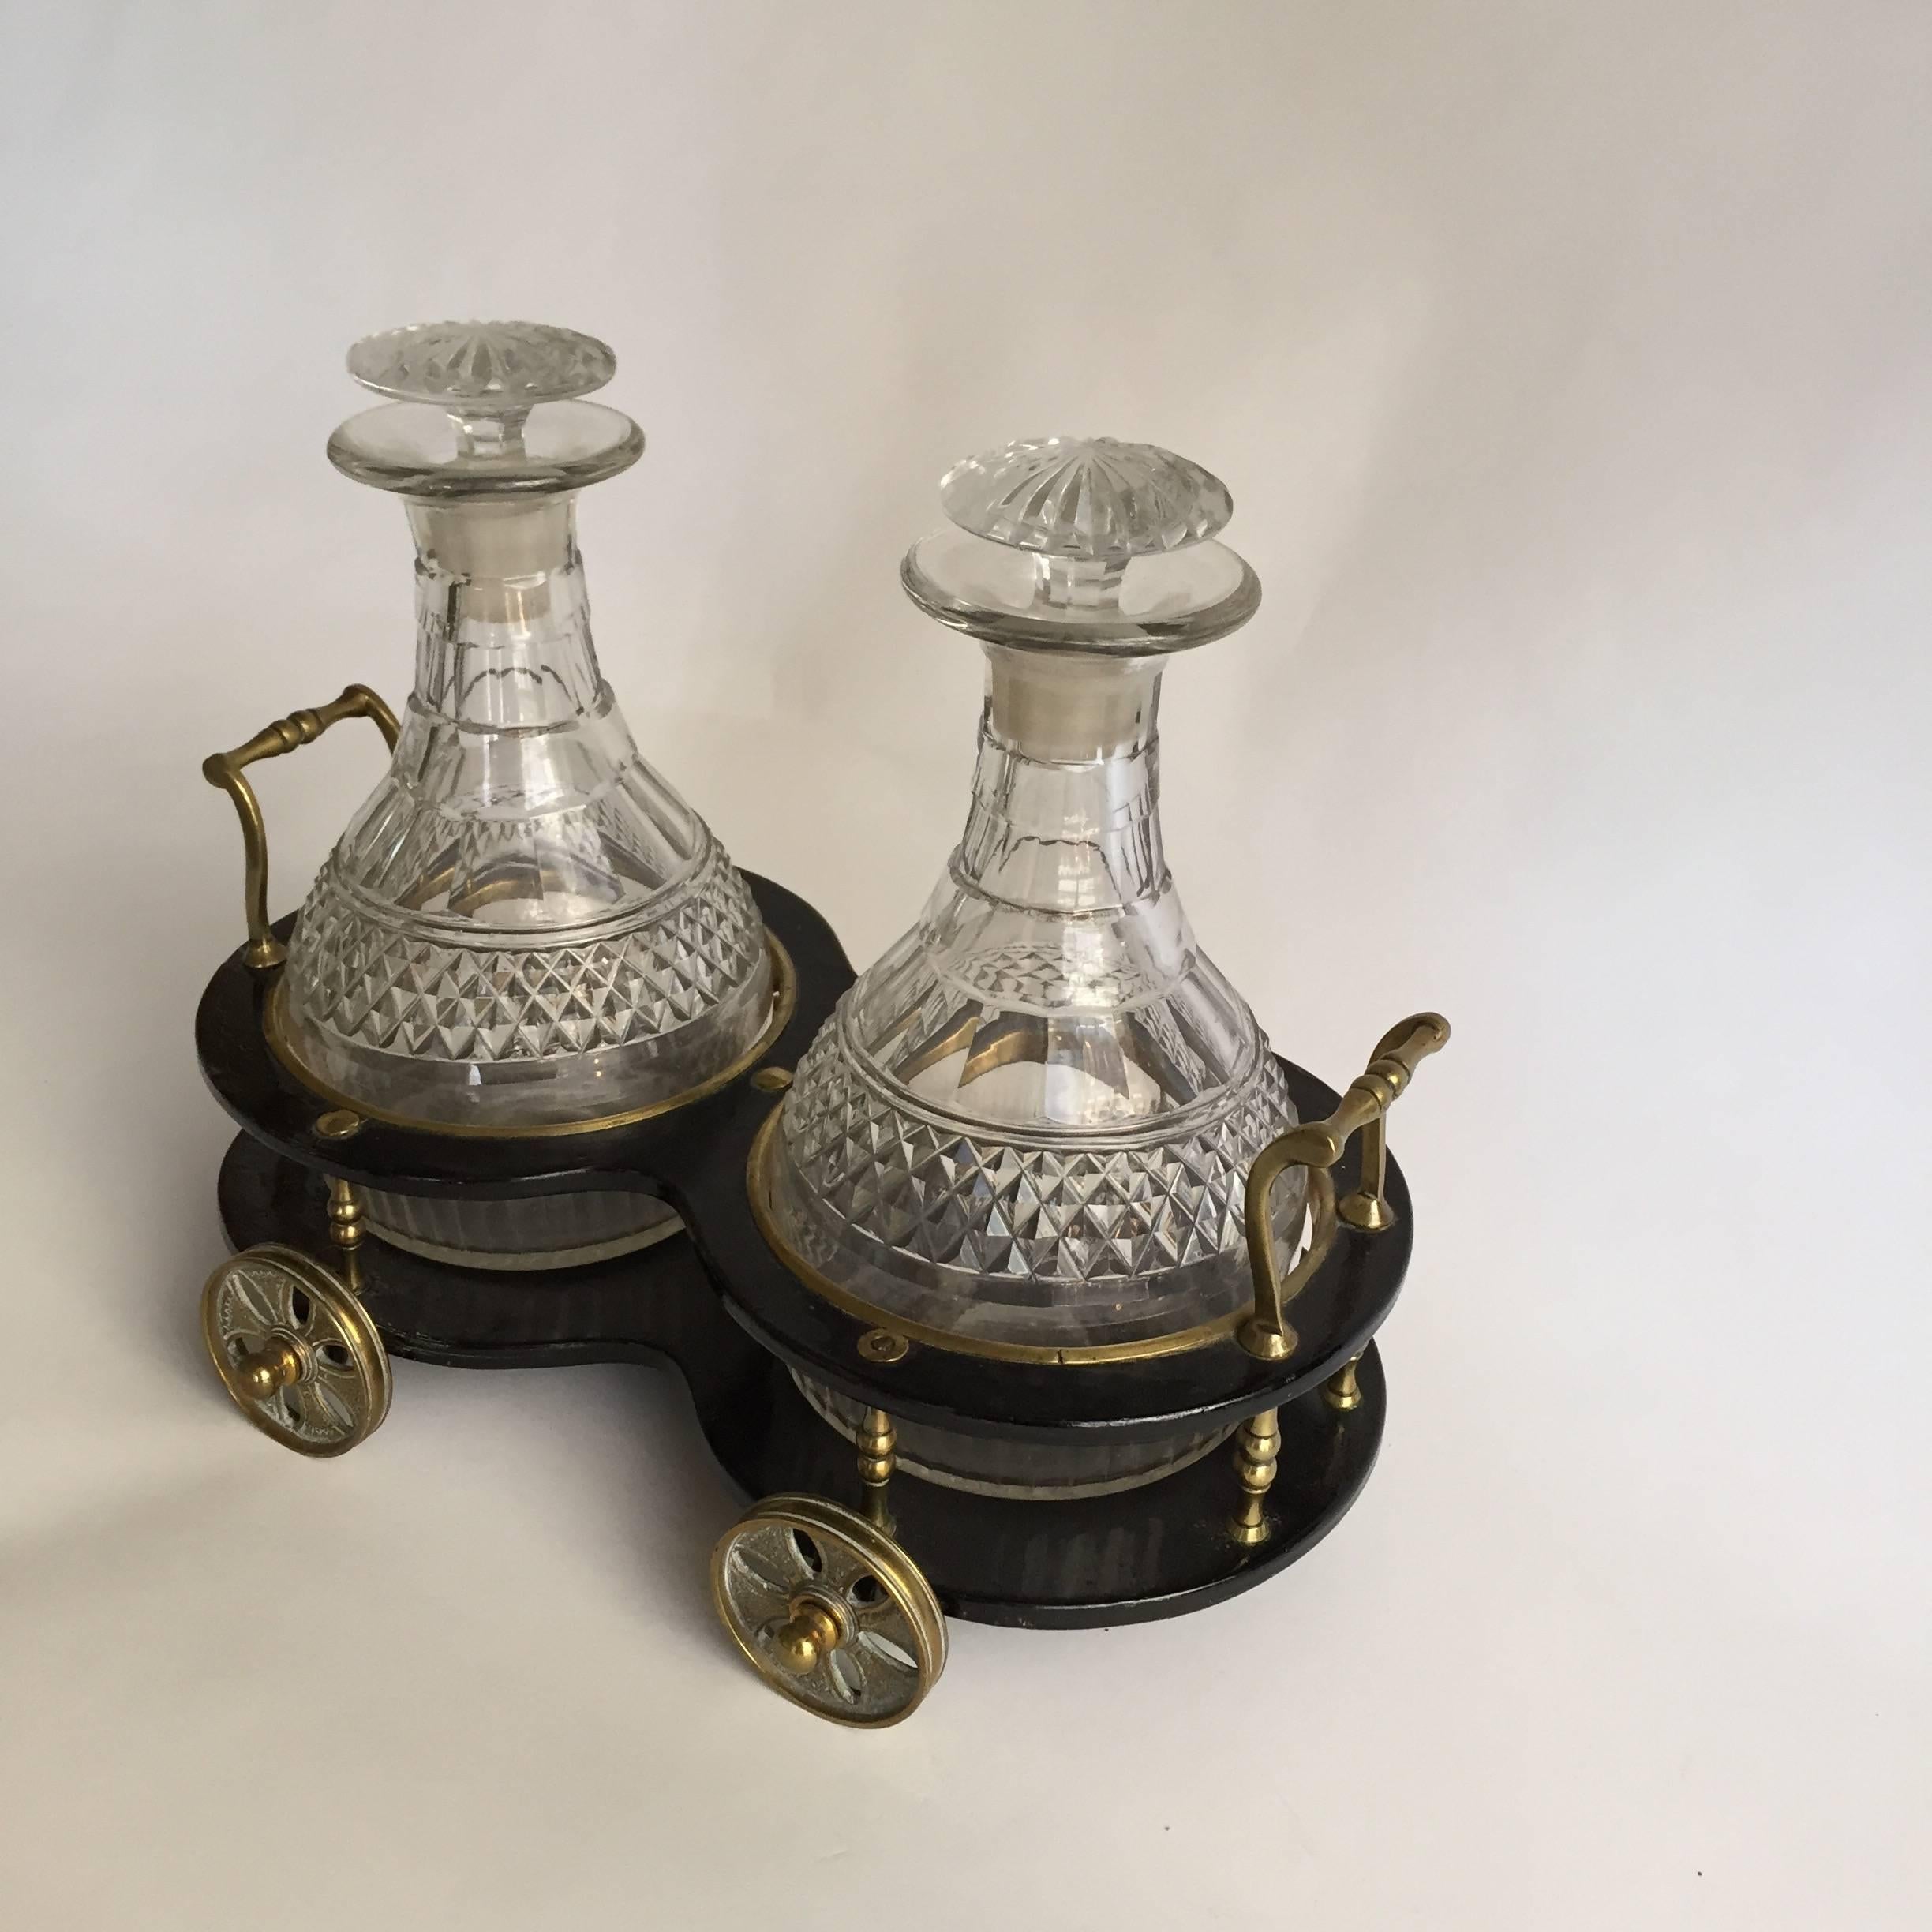 English papier mâché and brass decanter carriage trolleying a pair of Anglo-Irish cut-glass decanters and stoppers. Unmarked, circa 1840. Measures: 5” H., 11 ¼ W. 7 ¼”D., the carriage and the decanters 8 ½” H., 10 1 ¼” HOA. (Minor tiny chips and